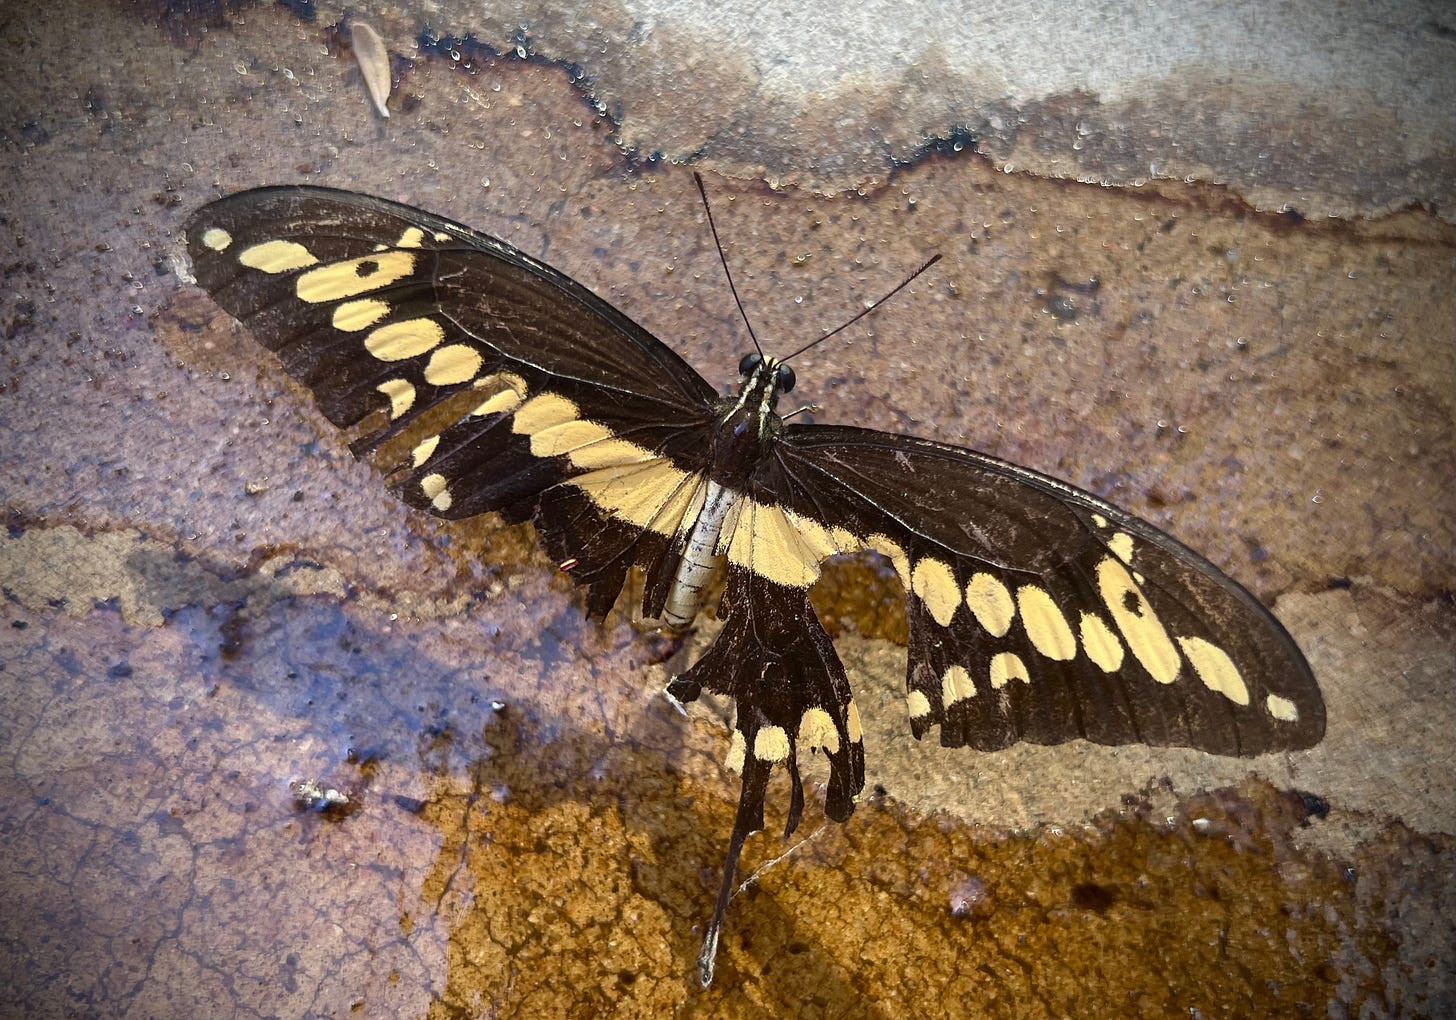 Picture of tiger swallowtail butterfly with damaged wings drinking from a puddle of water on wet concrete